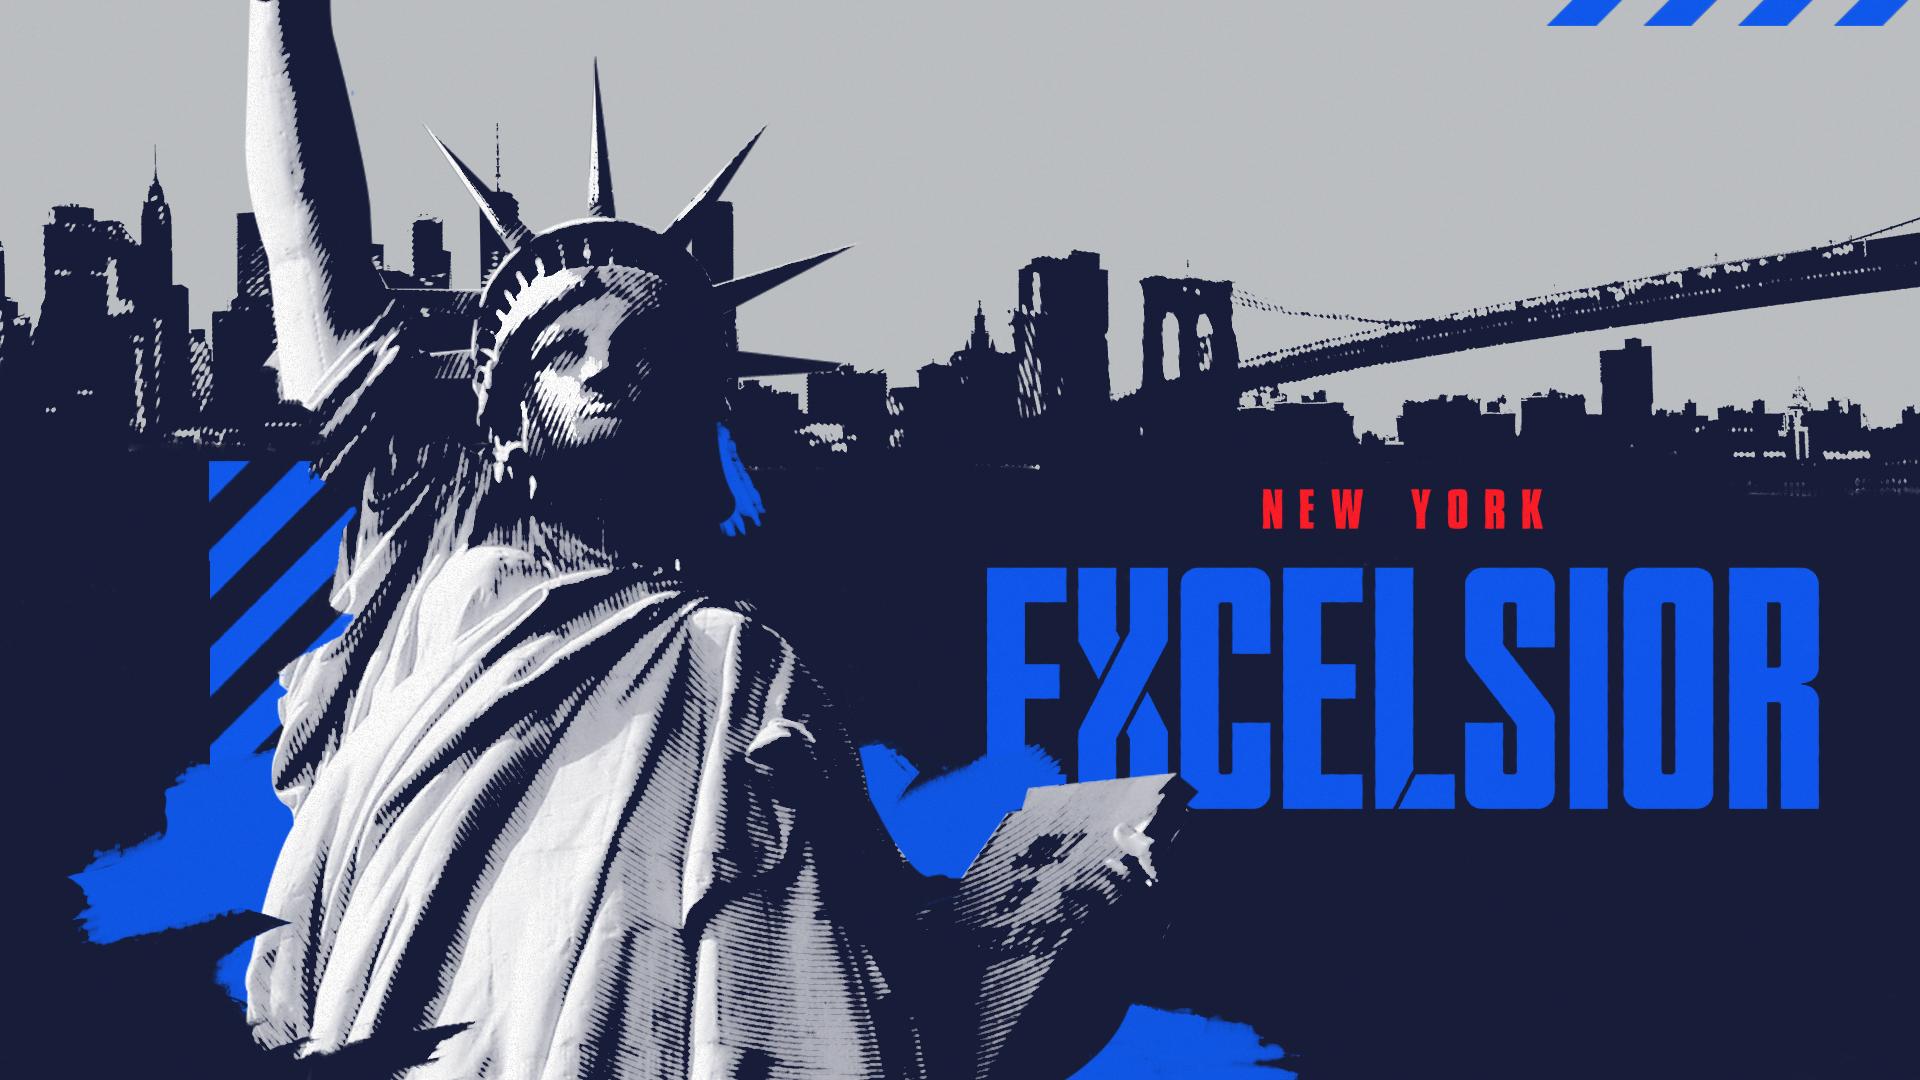 NYXL up your desktops and mobiles with the new NYXL wallpaper ➡ ⬅ #EverUpward